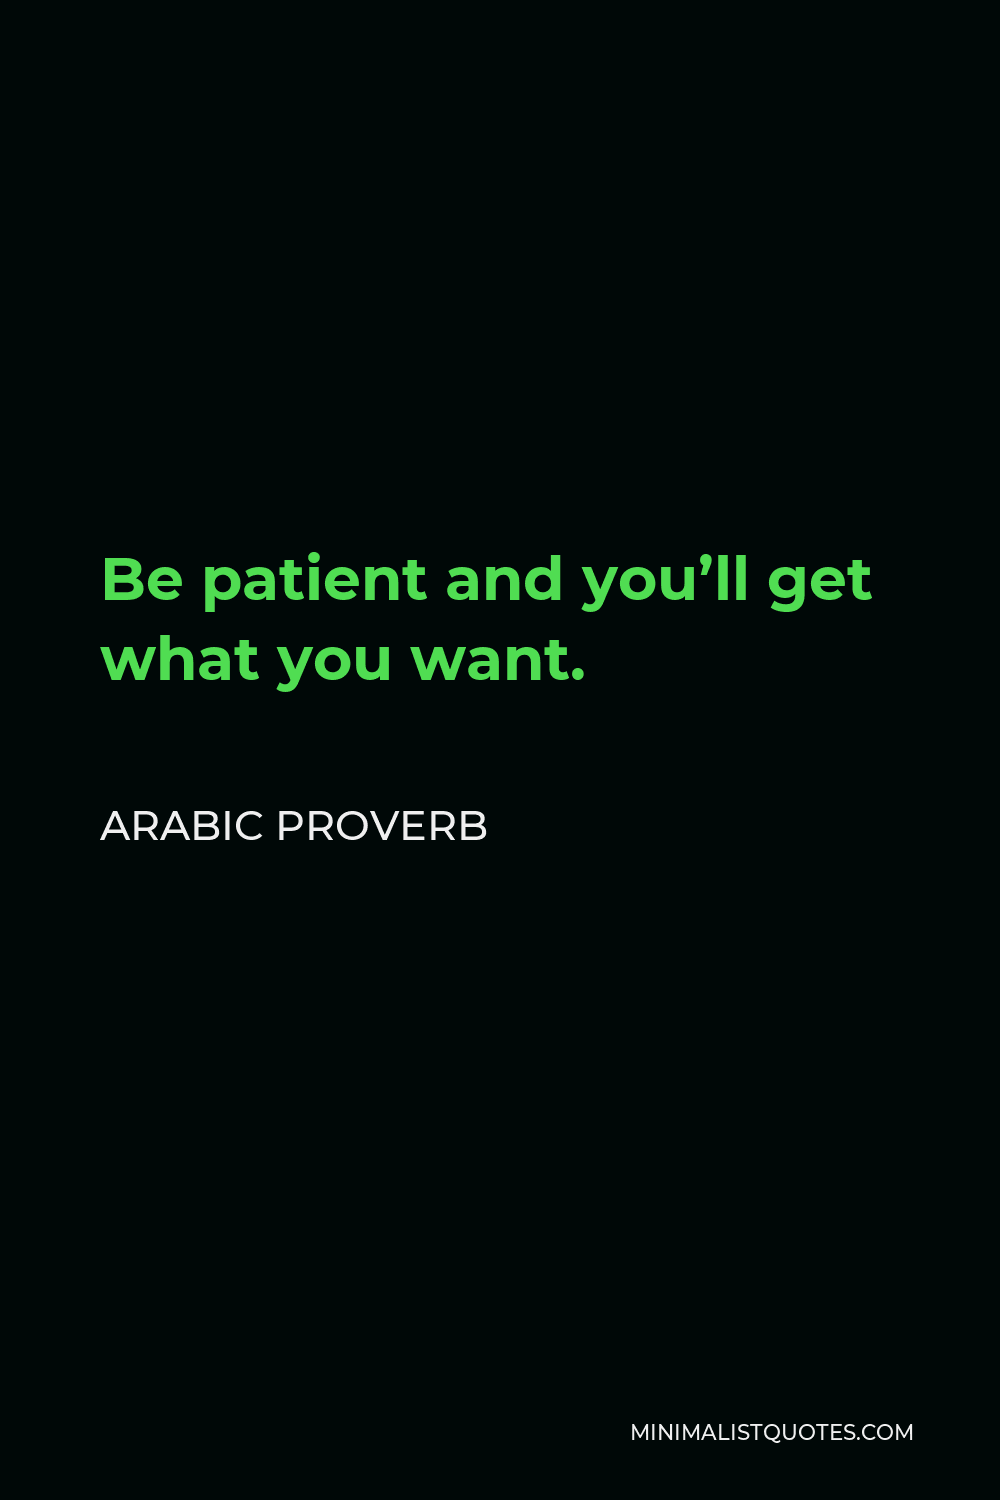 Arabic Proverb Quote - Be patient and you’ll get what you want.